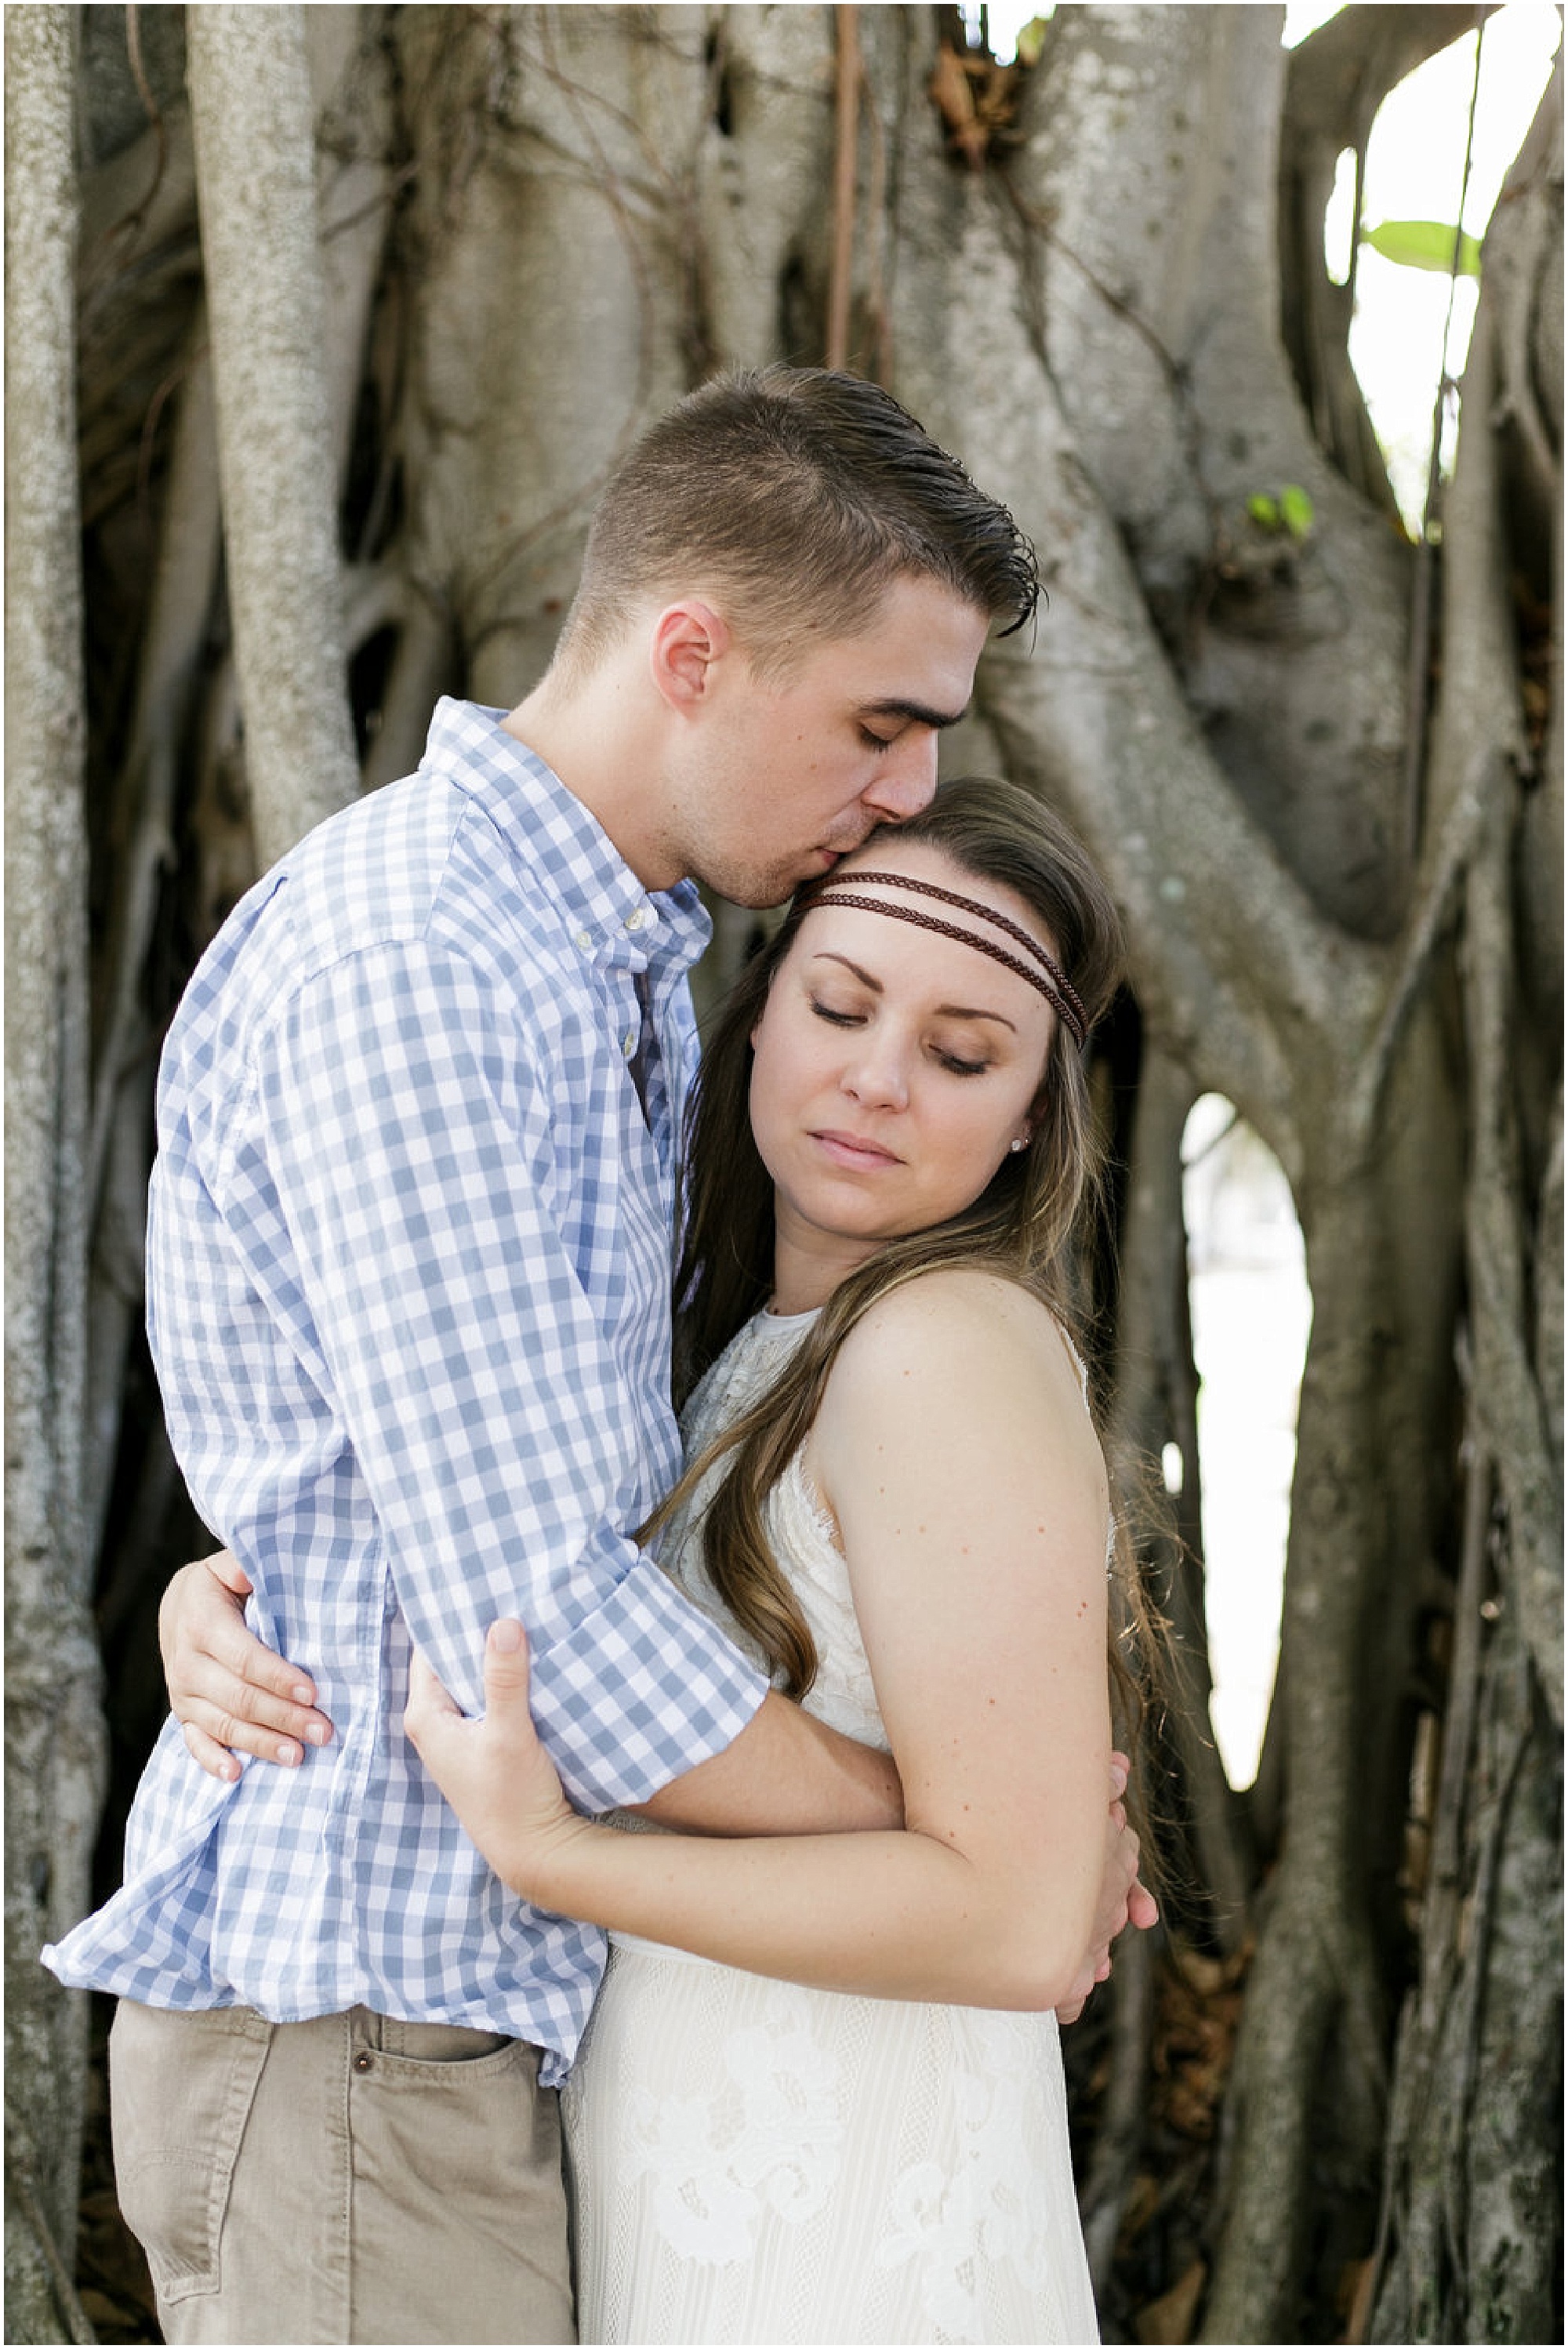 Couple hugging while surrounded by old trees. 